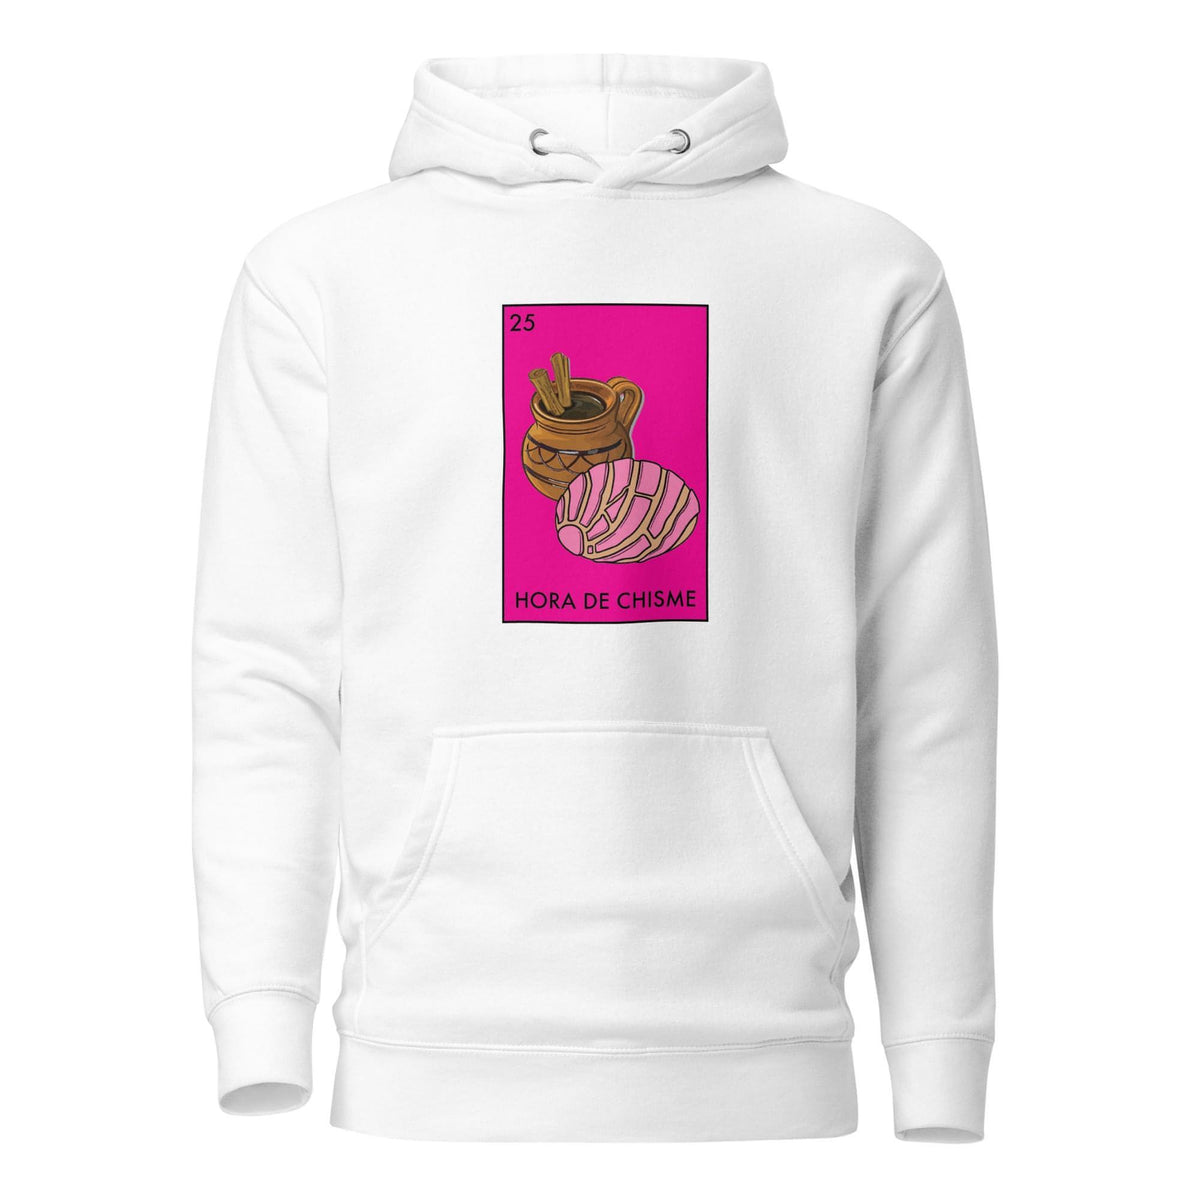 Chisme Loteria Hoodie (Time for Gossip)